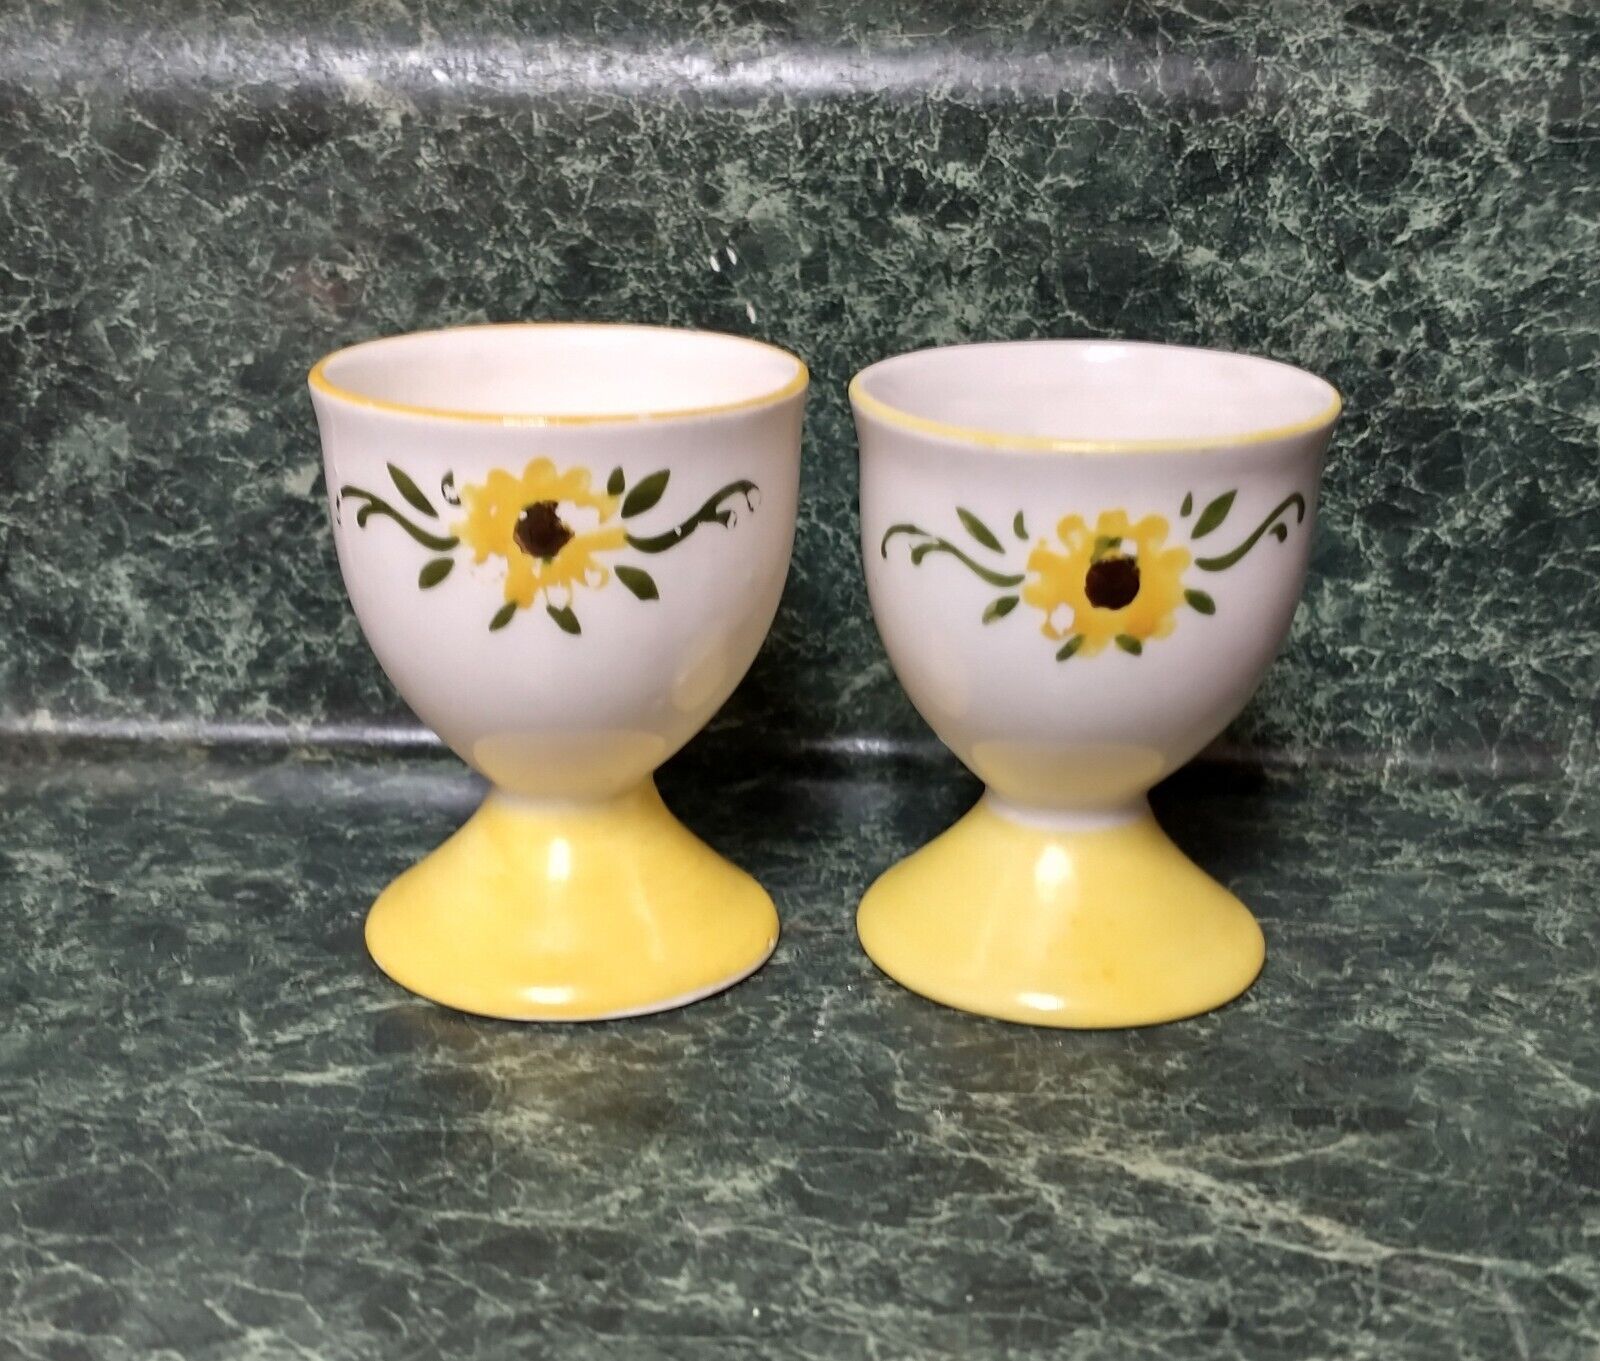 Vintage Pair Hand Painted Egg Cups - Yellow Flowers - Pottery Egg Cups *As Is*